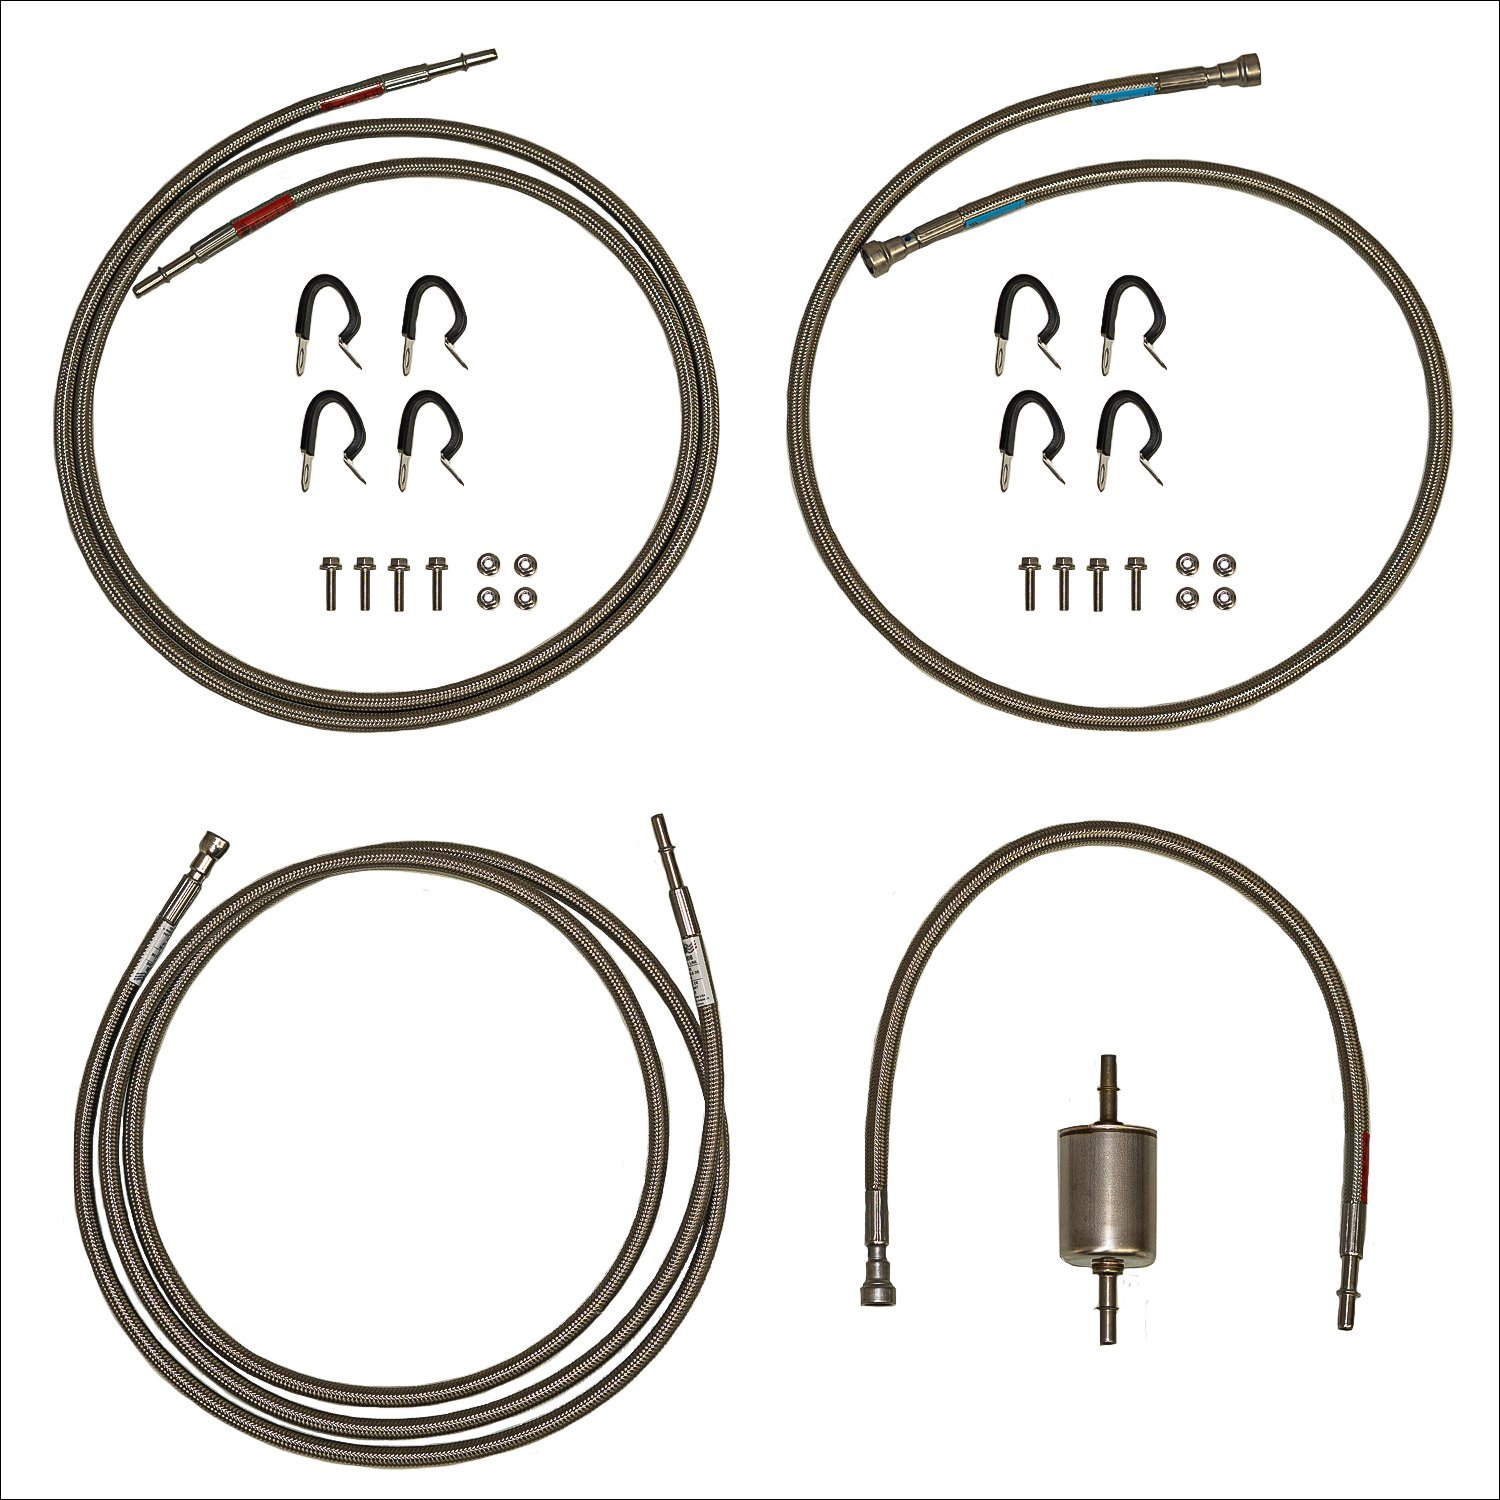 Quick-Fix Complete Fuel Line Kit for 2001-2003 GM 2500 HD, 3500 Regular Cab Trucks w/ V8 Engine [Braided Stainless]